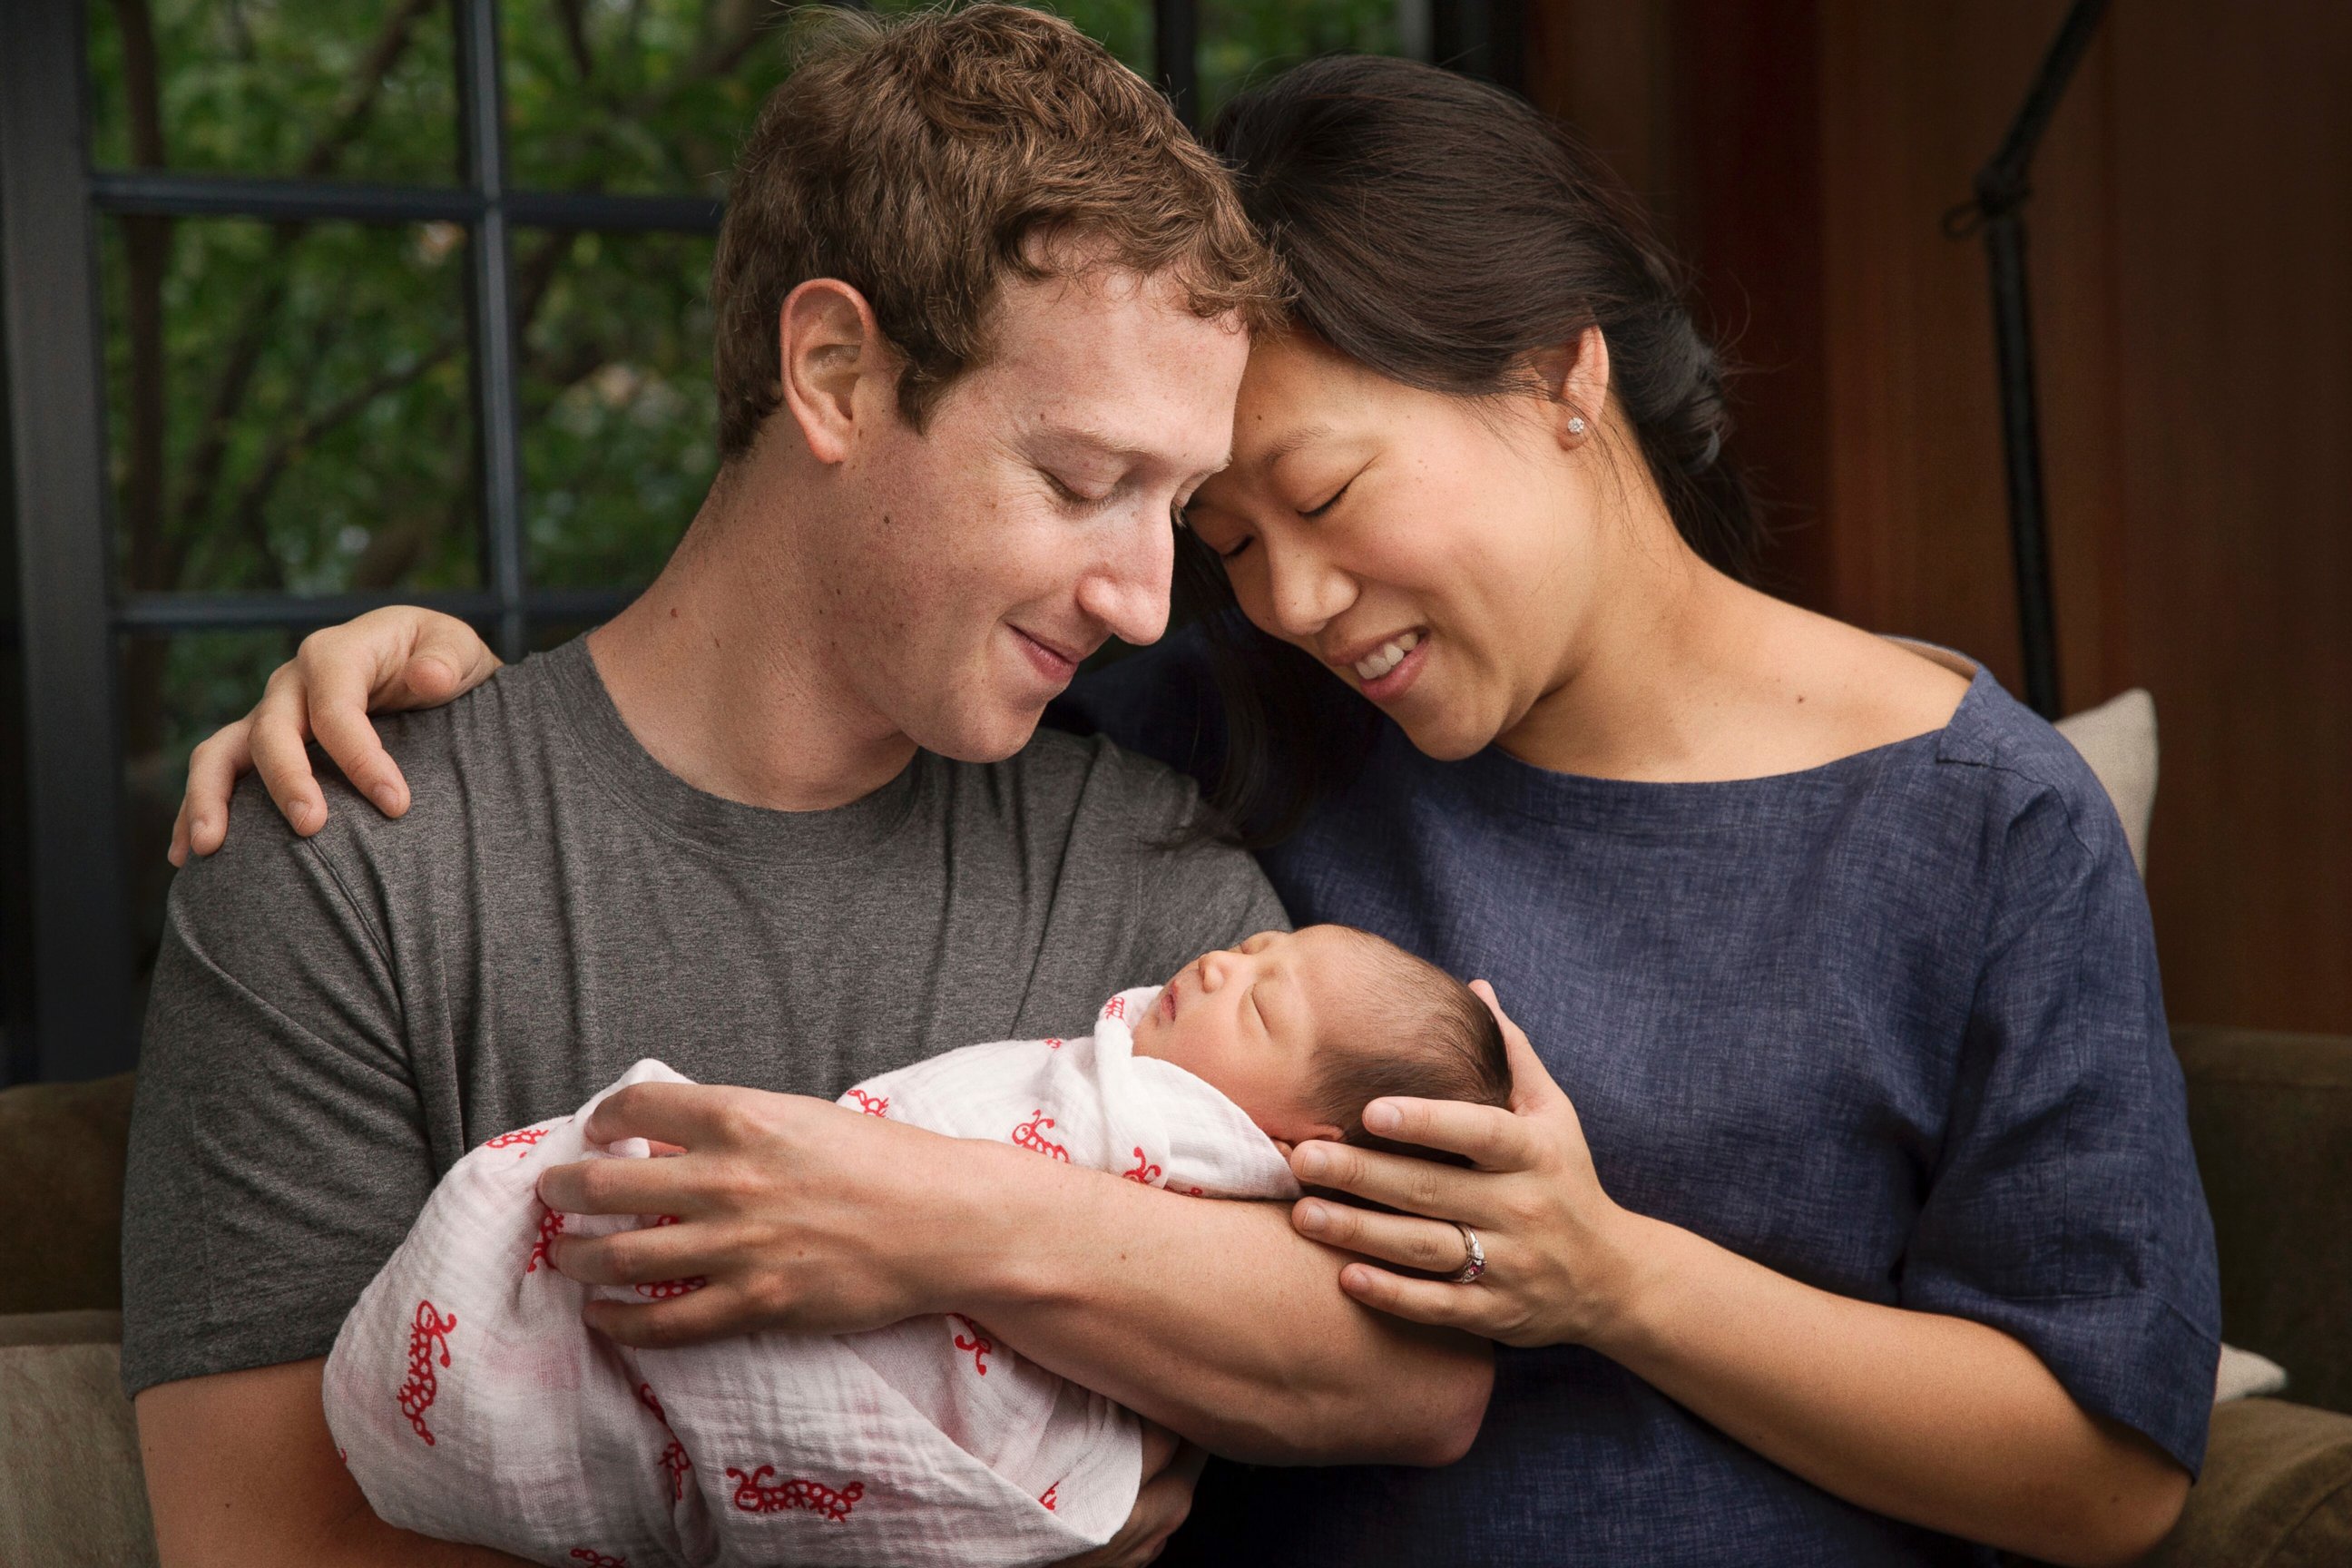 PHOTO: Max Chan Zuckerberg is held by her parents, Mark Zuckerberg and Priscilla Chan Zuckerberg in this undated photo provided by Mark Zuckerberg.  